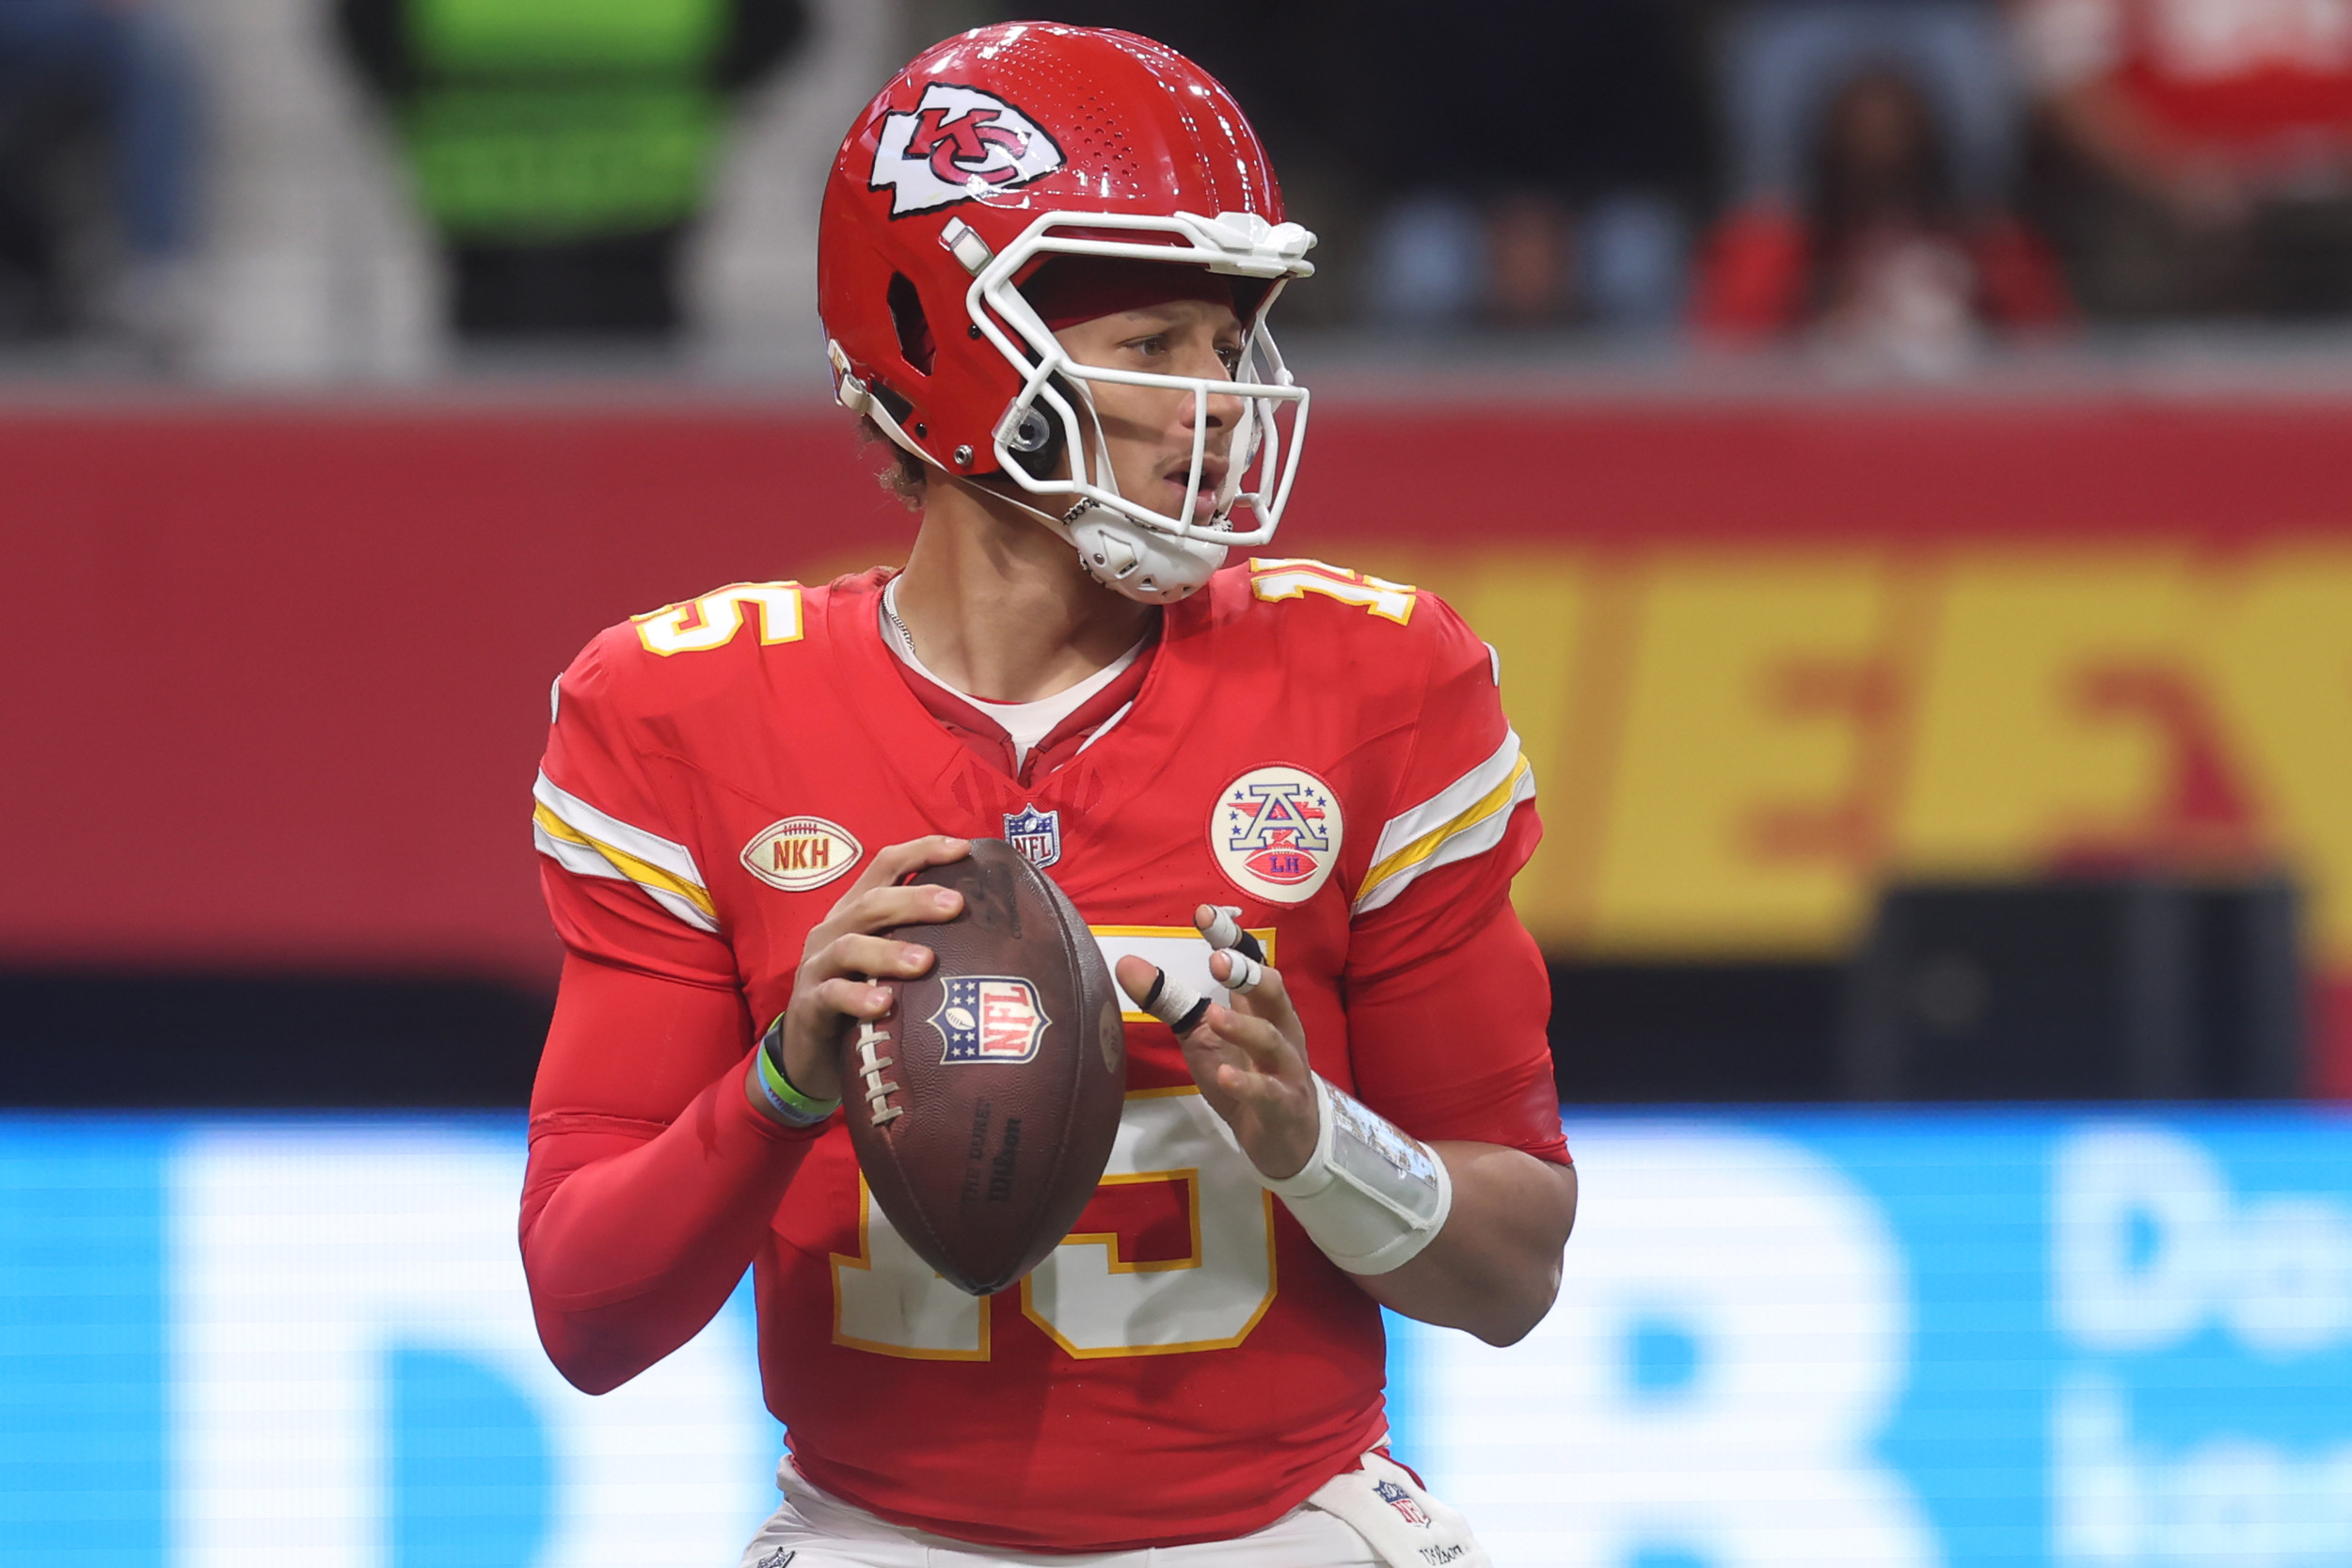 Patrick Mahomes joining ESPN’s ManningCast after failed “audition” for show